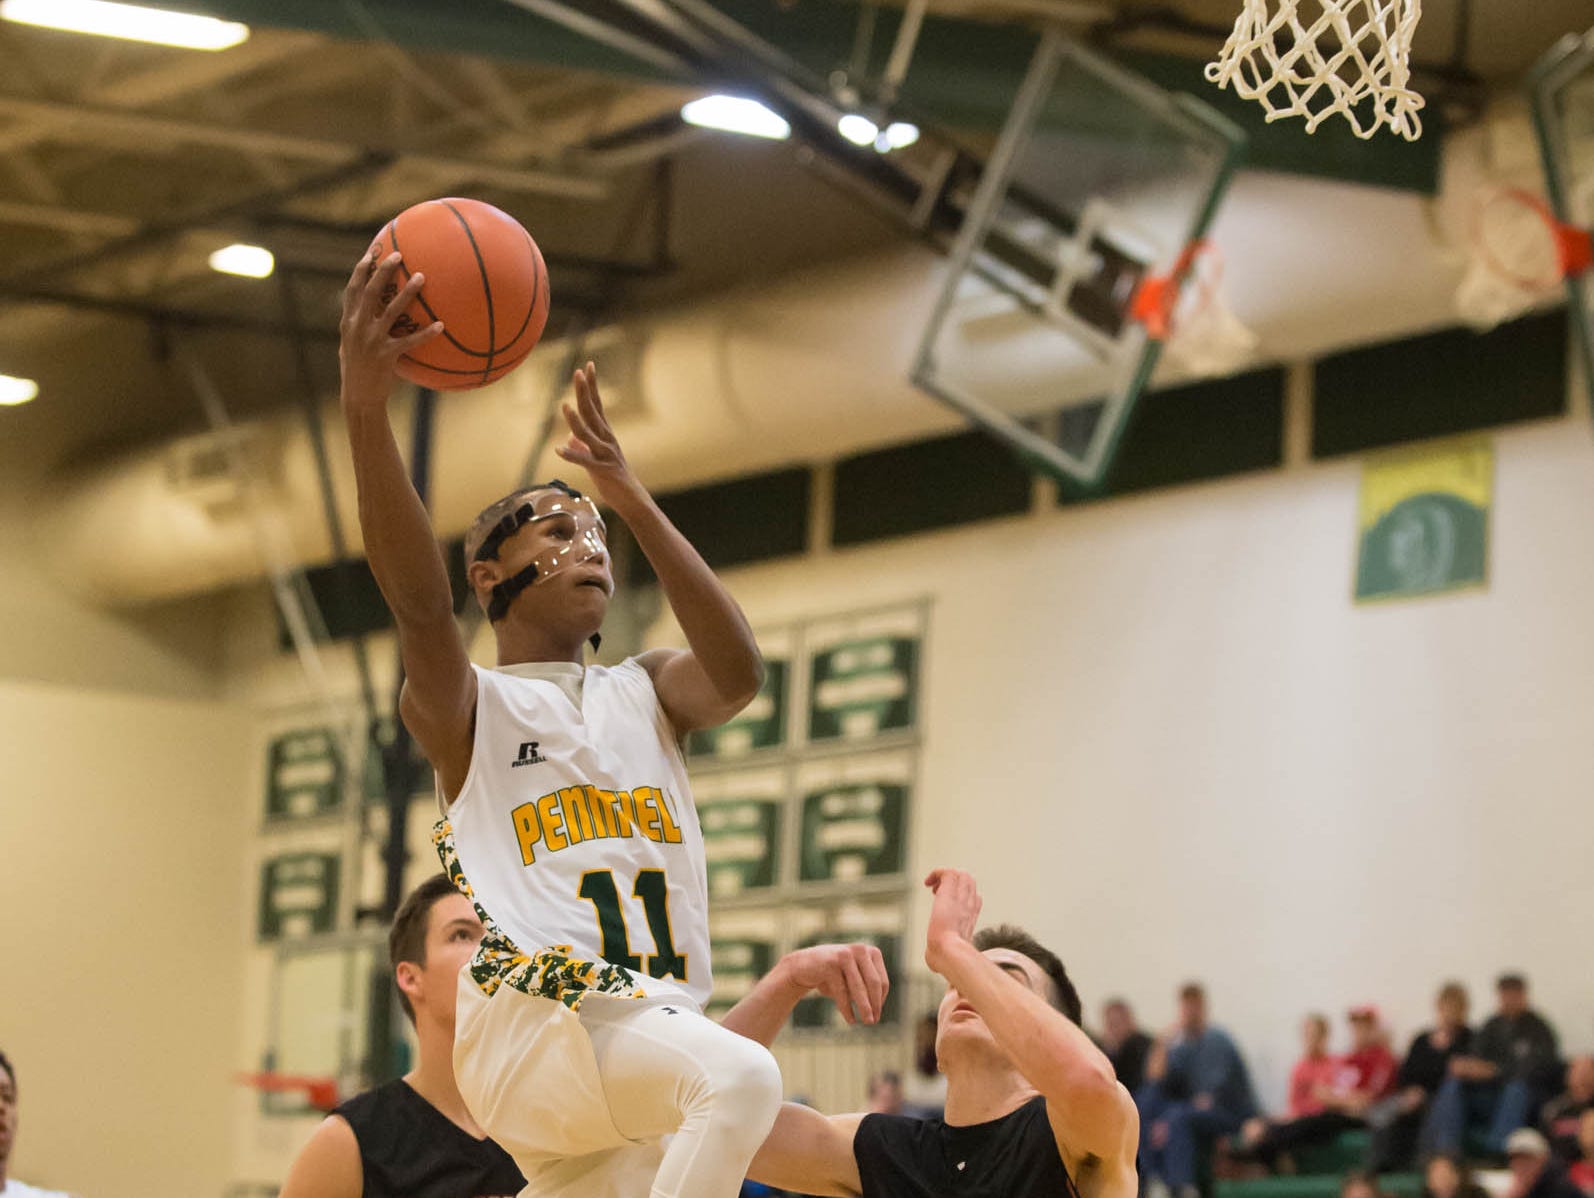 Pennfield's Francois Jamierson (11) goes for the hoop during Friday night's game.